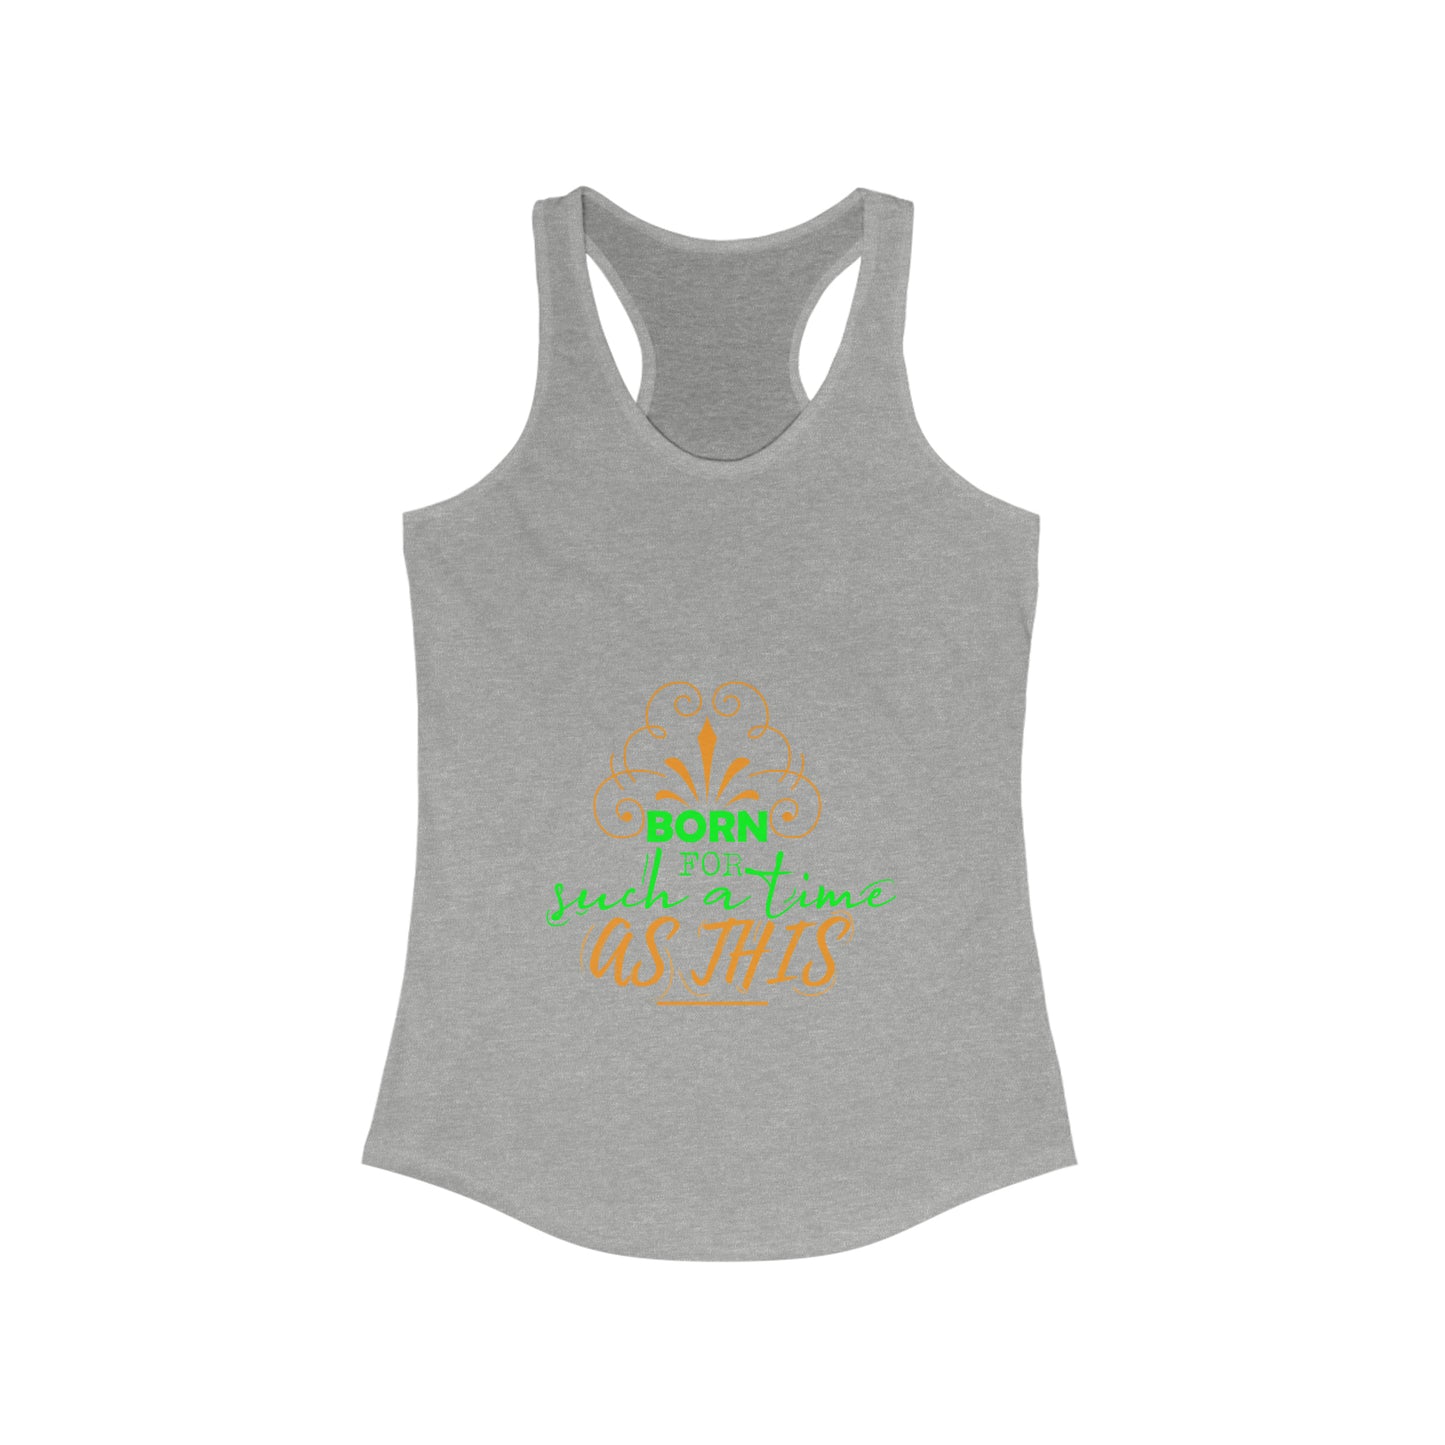 Born For Such A Time As This  Slim Fit Tank-top